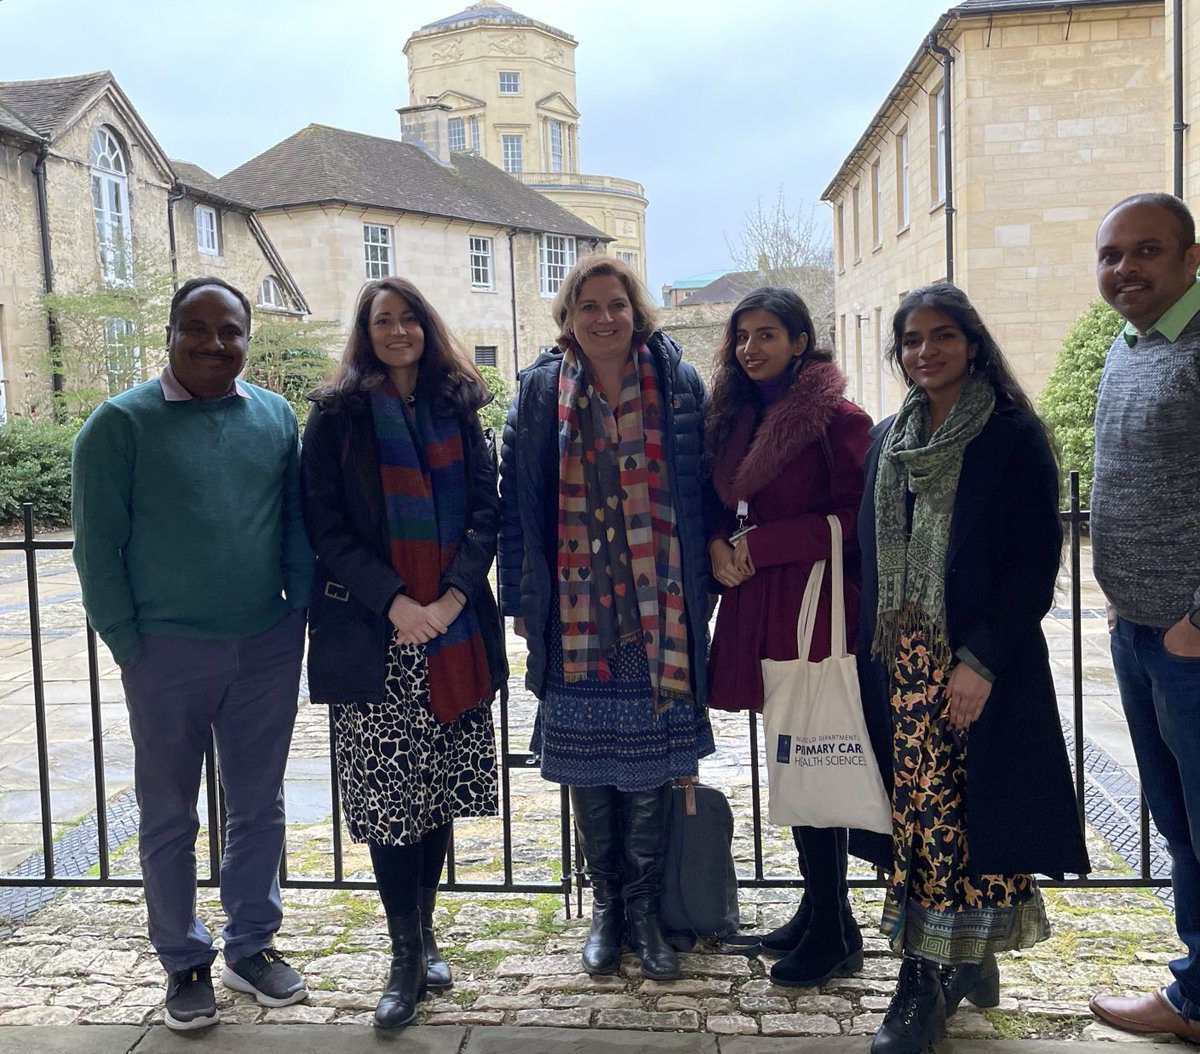 Great SMARTHealth Pregnancy team meeting in Oxford. Practical solutions in pregnancy care for lifelong health ⁦@greentempleton⁩ ⁦@Ox_wrh⁩ ⁦@NicoleVotruba⁩ ⁦@Drpraveend⁩